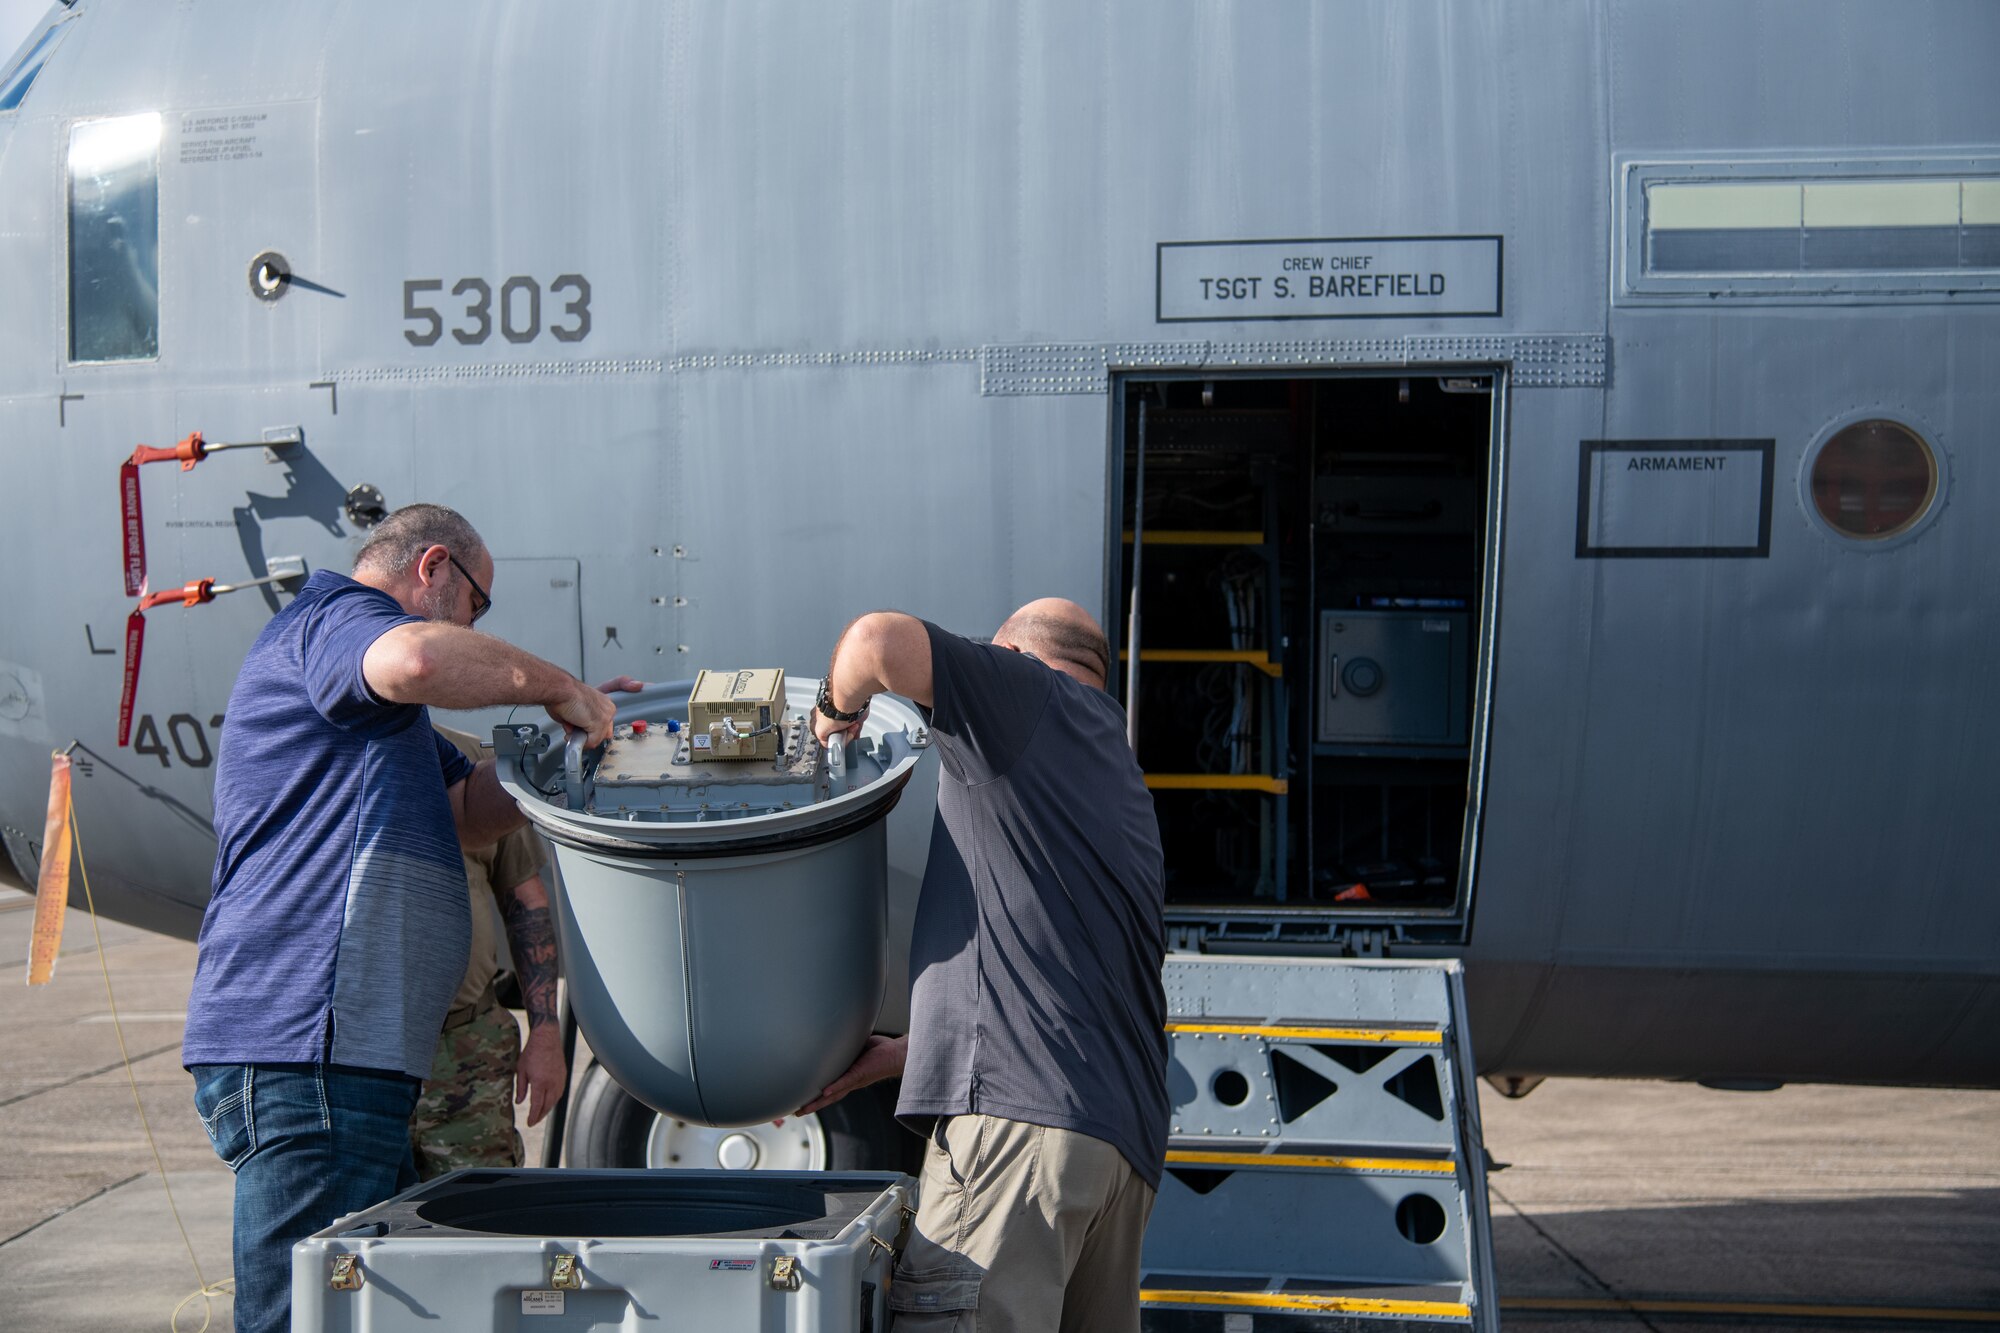 Two men lift a satellite radome from a plastic bin. Aircraft in background.